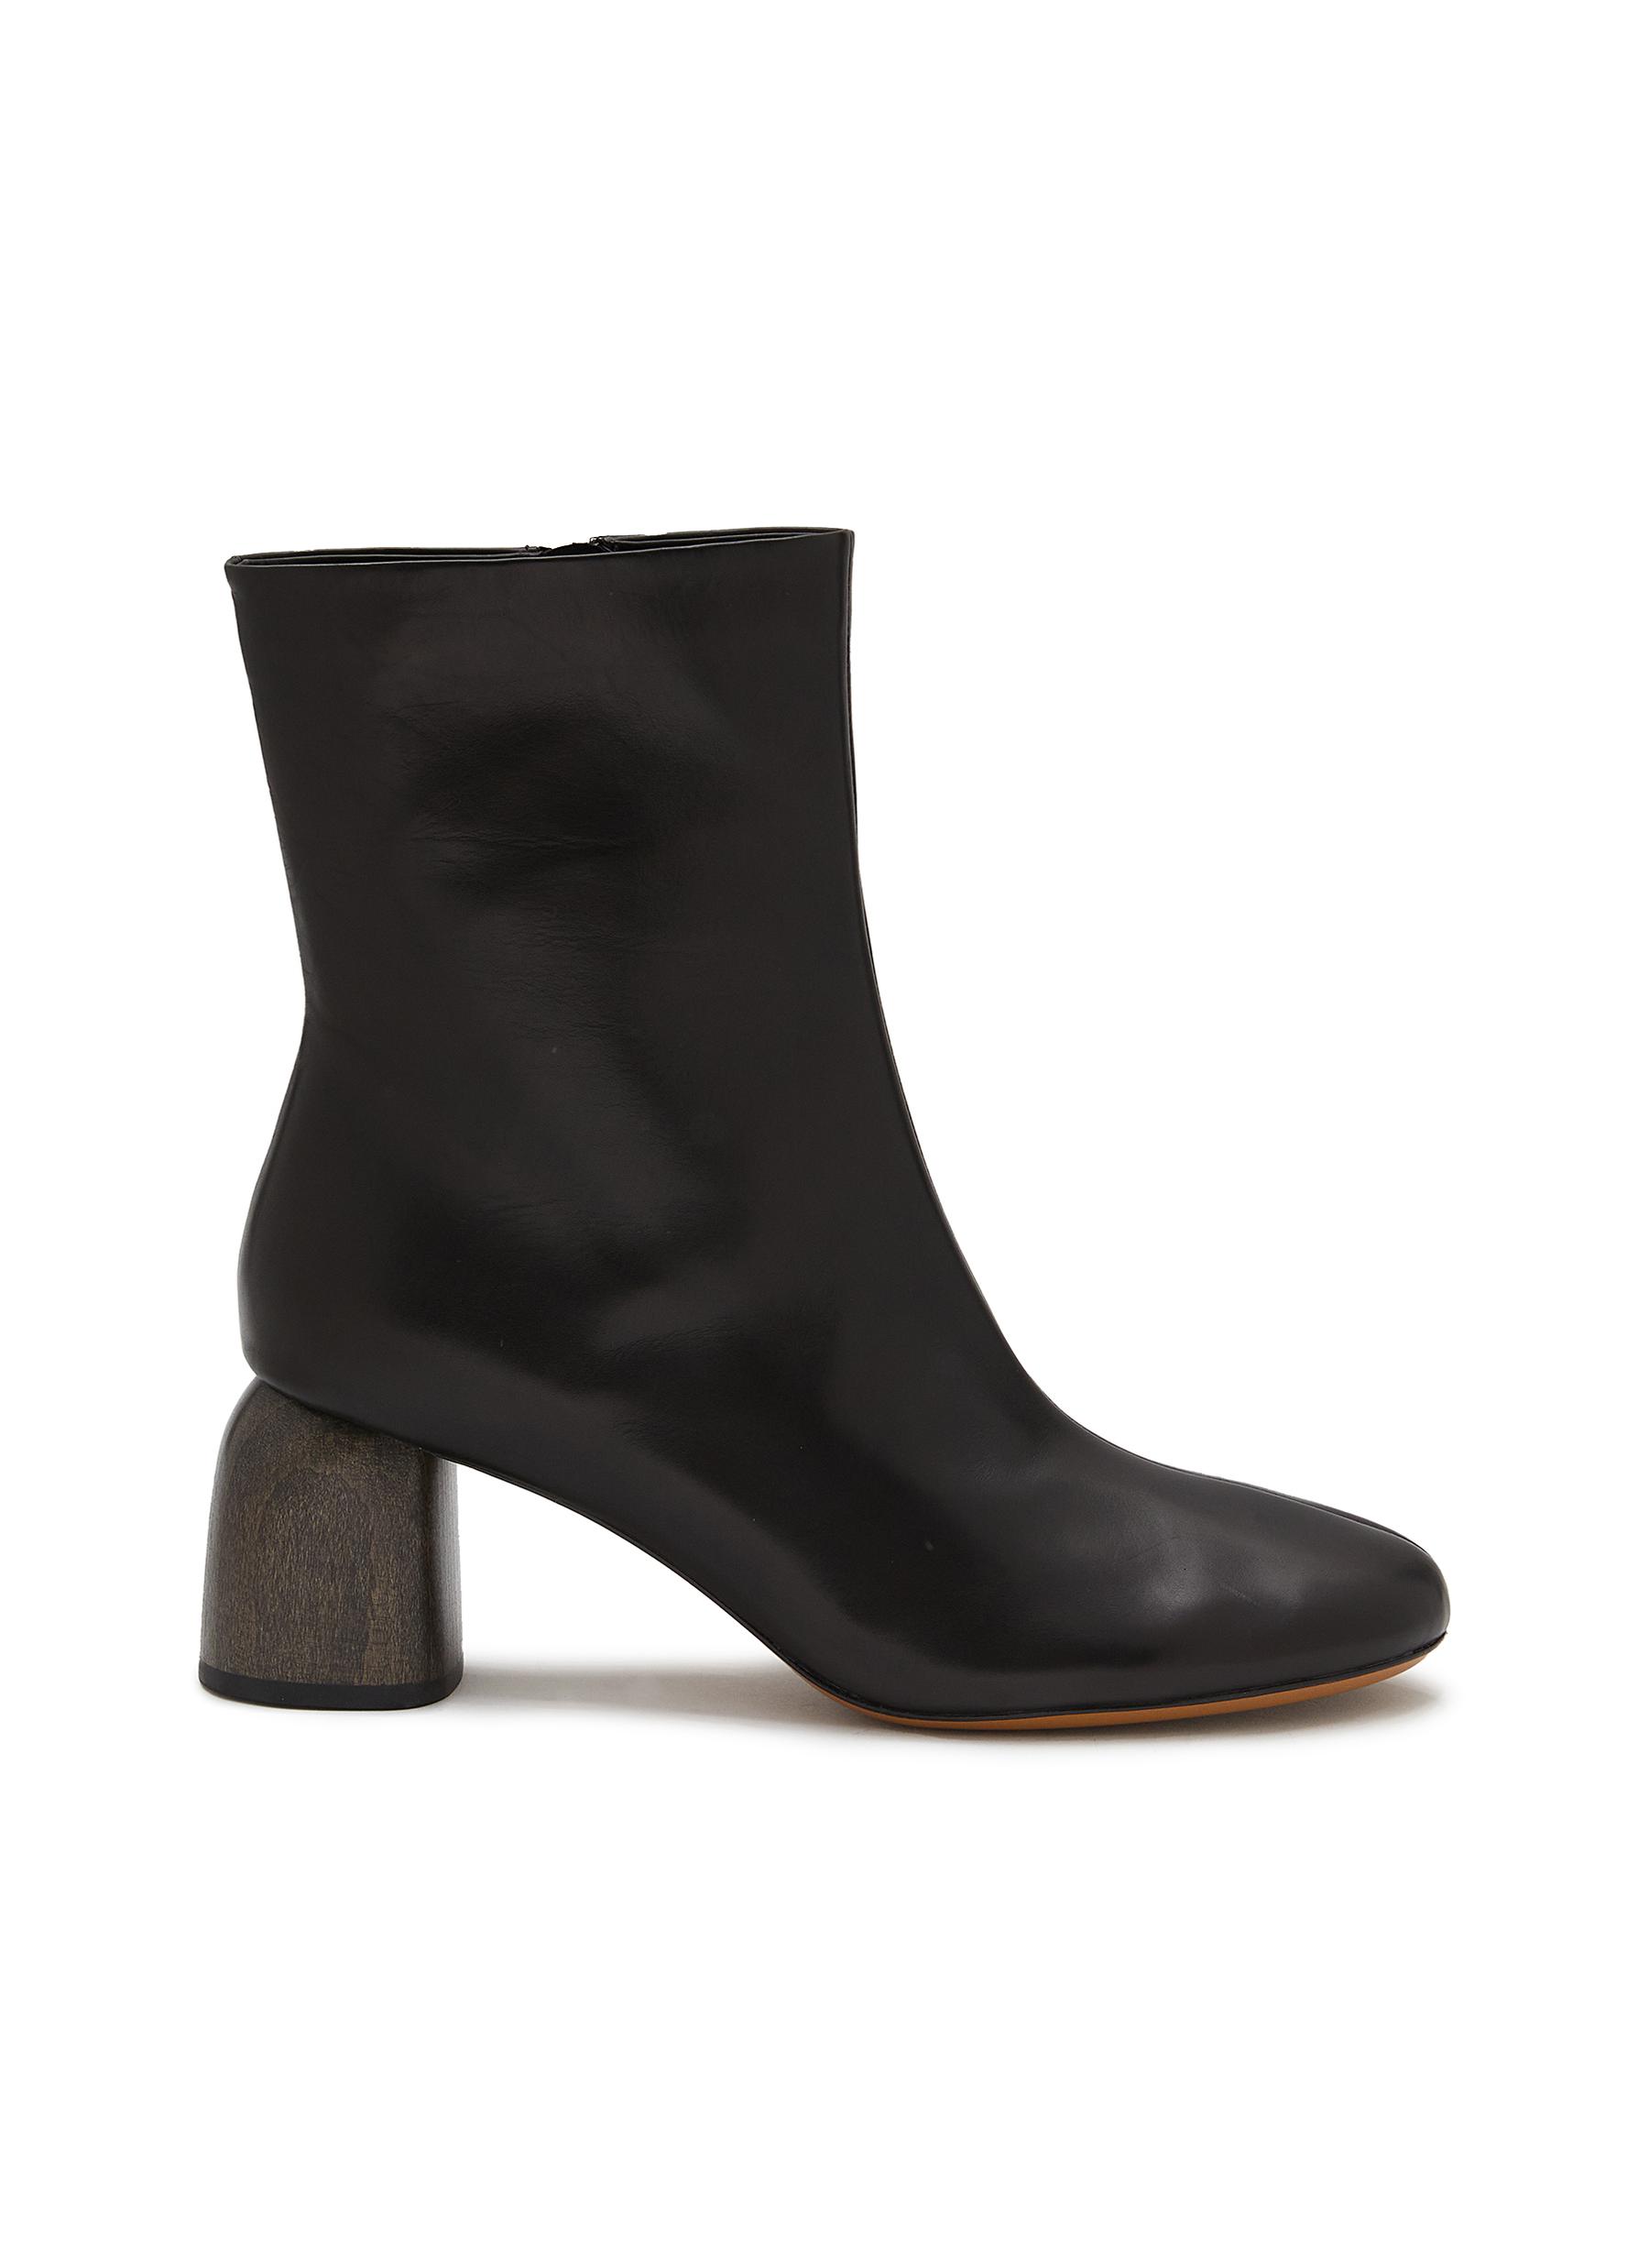 EQUIL, Budapest Wood Heel Leather Ankle Boots, BLACK, Women